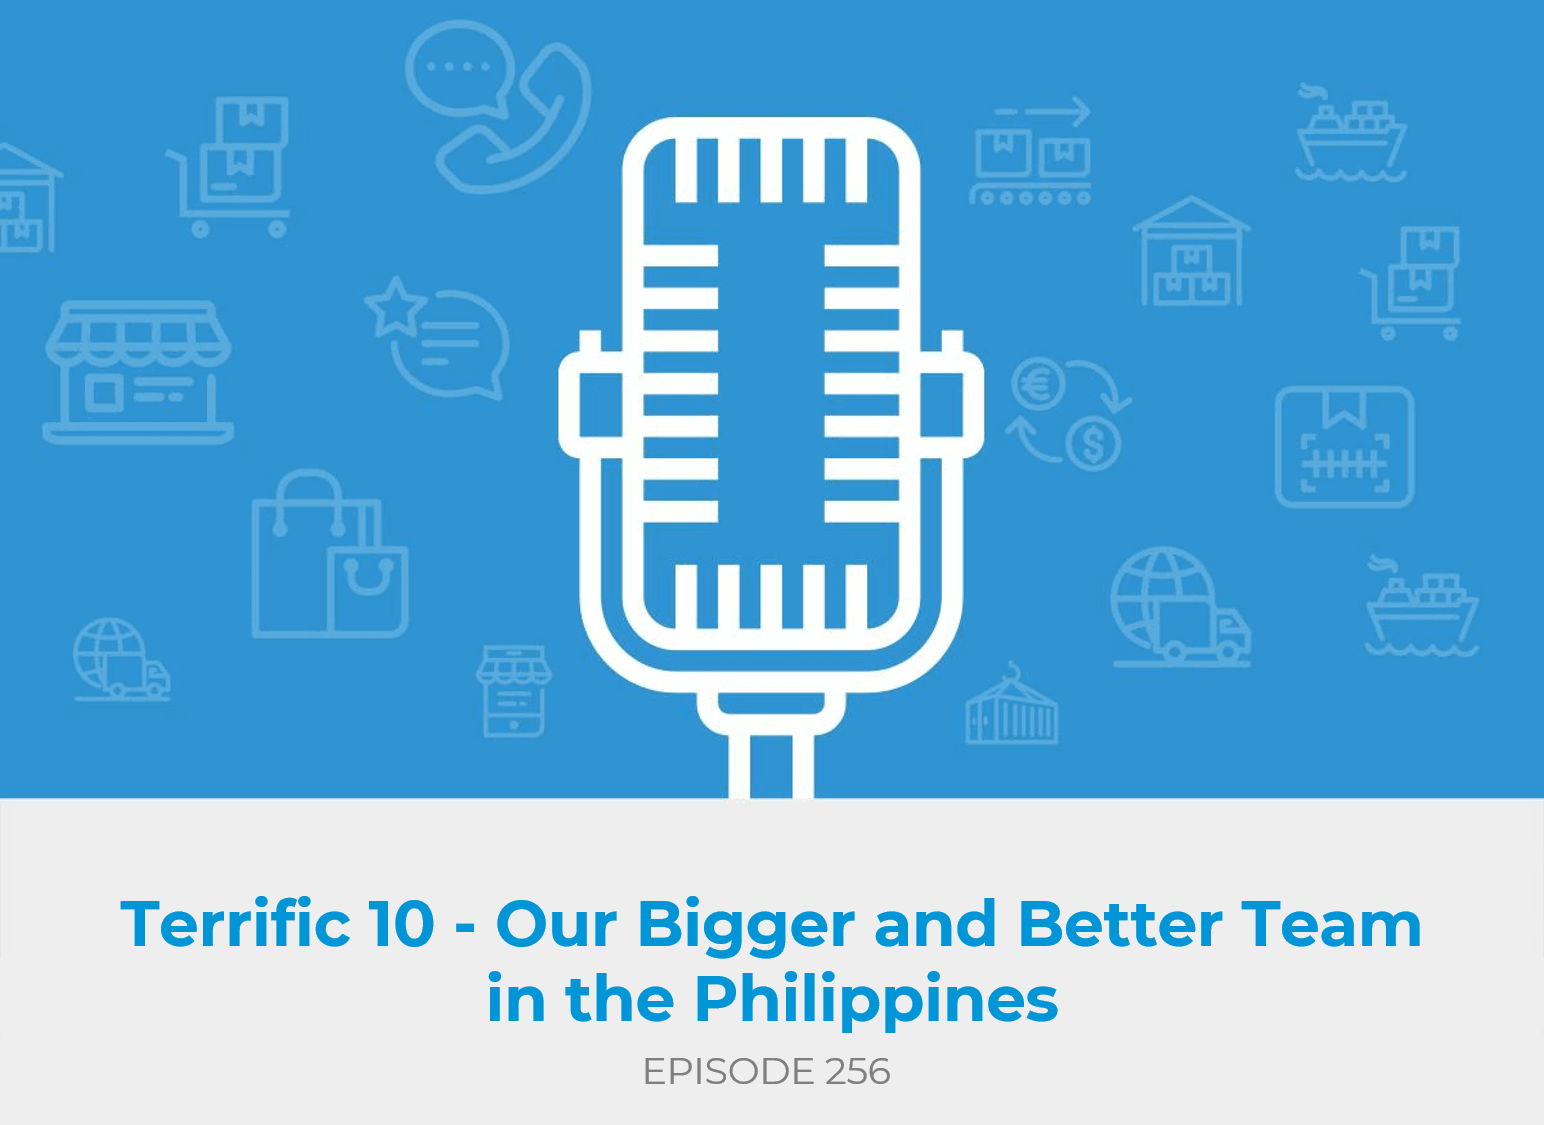 Terrific 10 - Our Bigger and Better Team in the Philippines